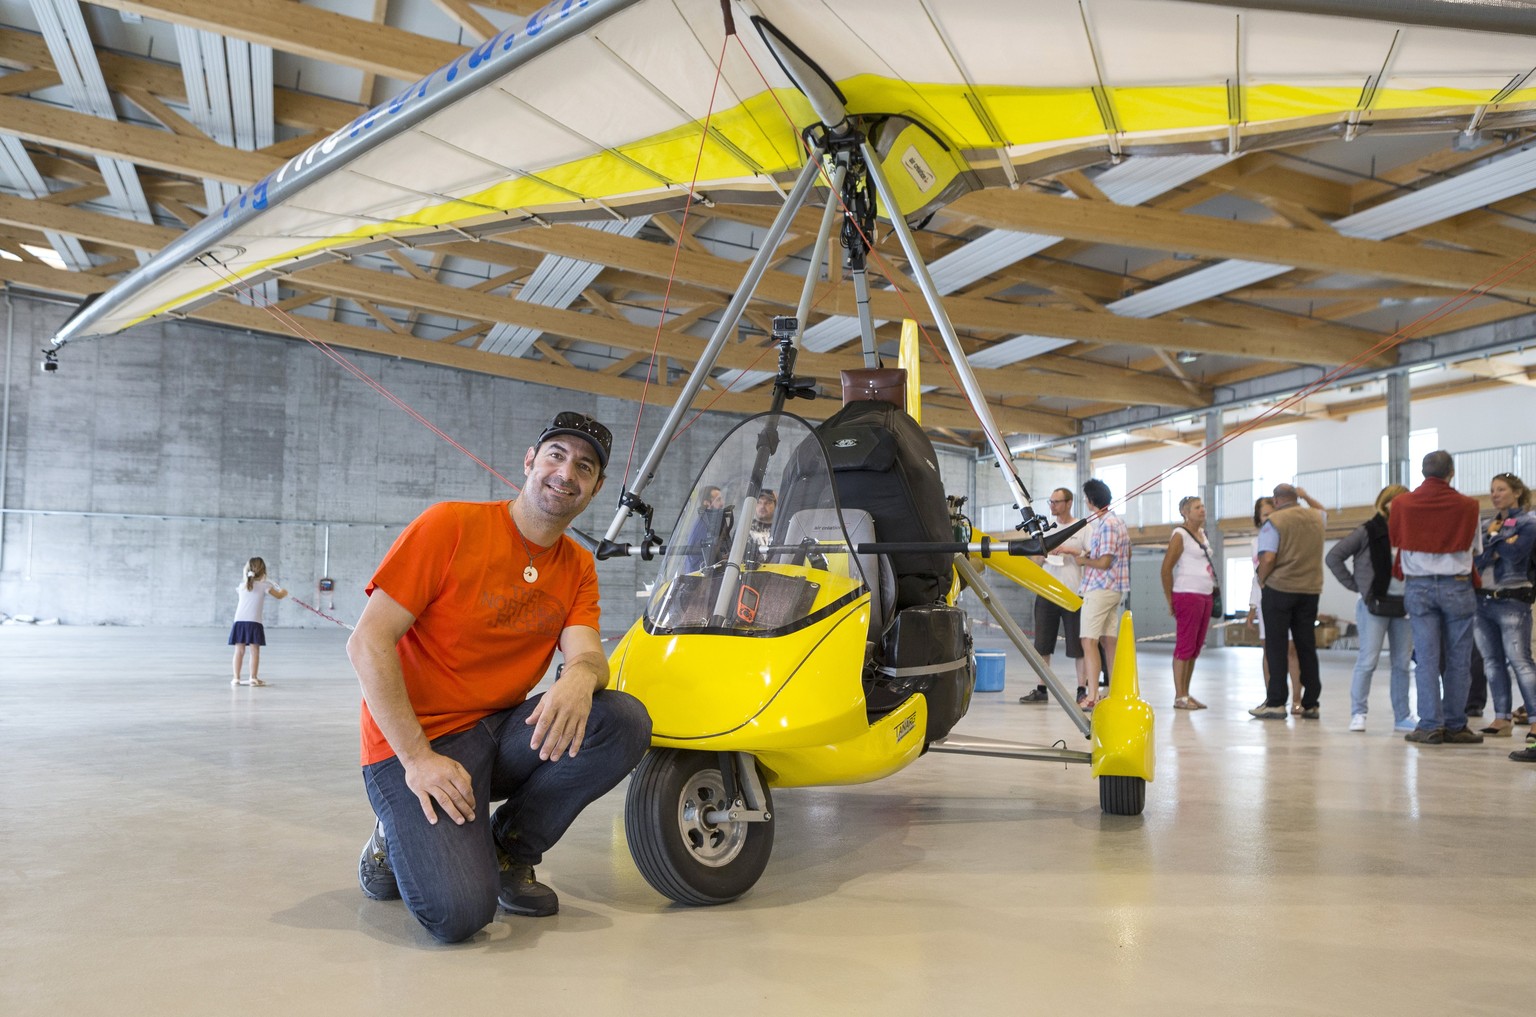 epa06104850 Swiss adventurer Xavier Rosset poses with his light sport aircraft (LSA) before embarking on the first day of his Fly the World adventure project, Sion, Switzerland, 23 July 2017. Rosset ...